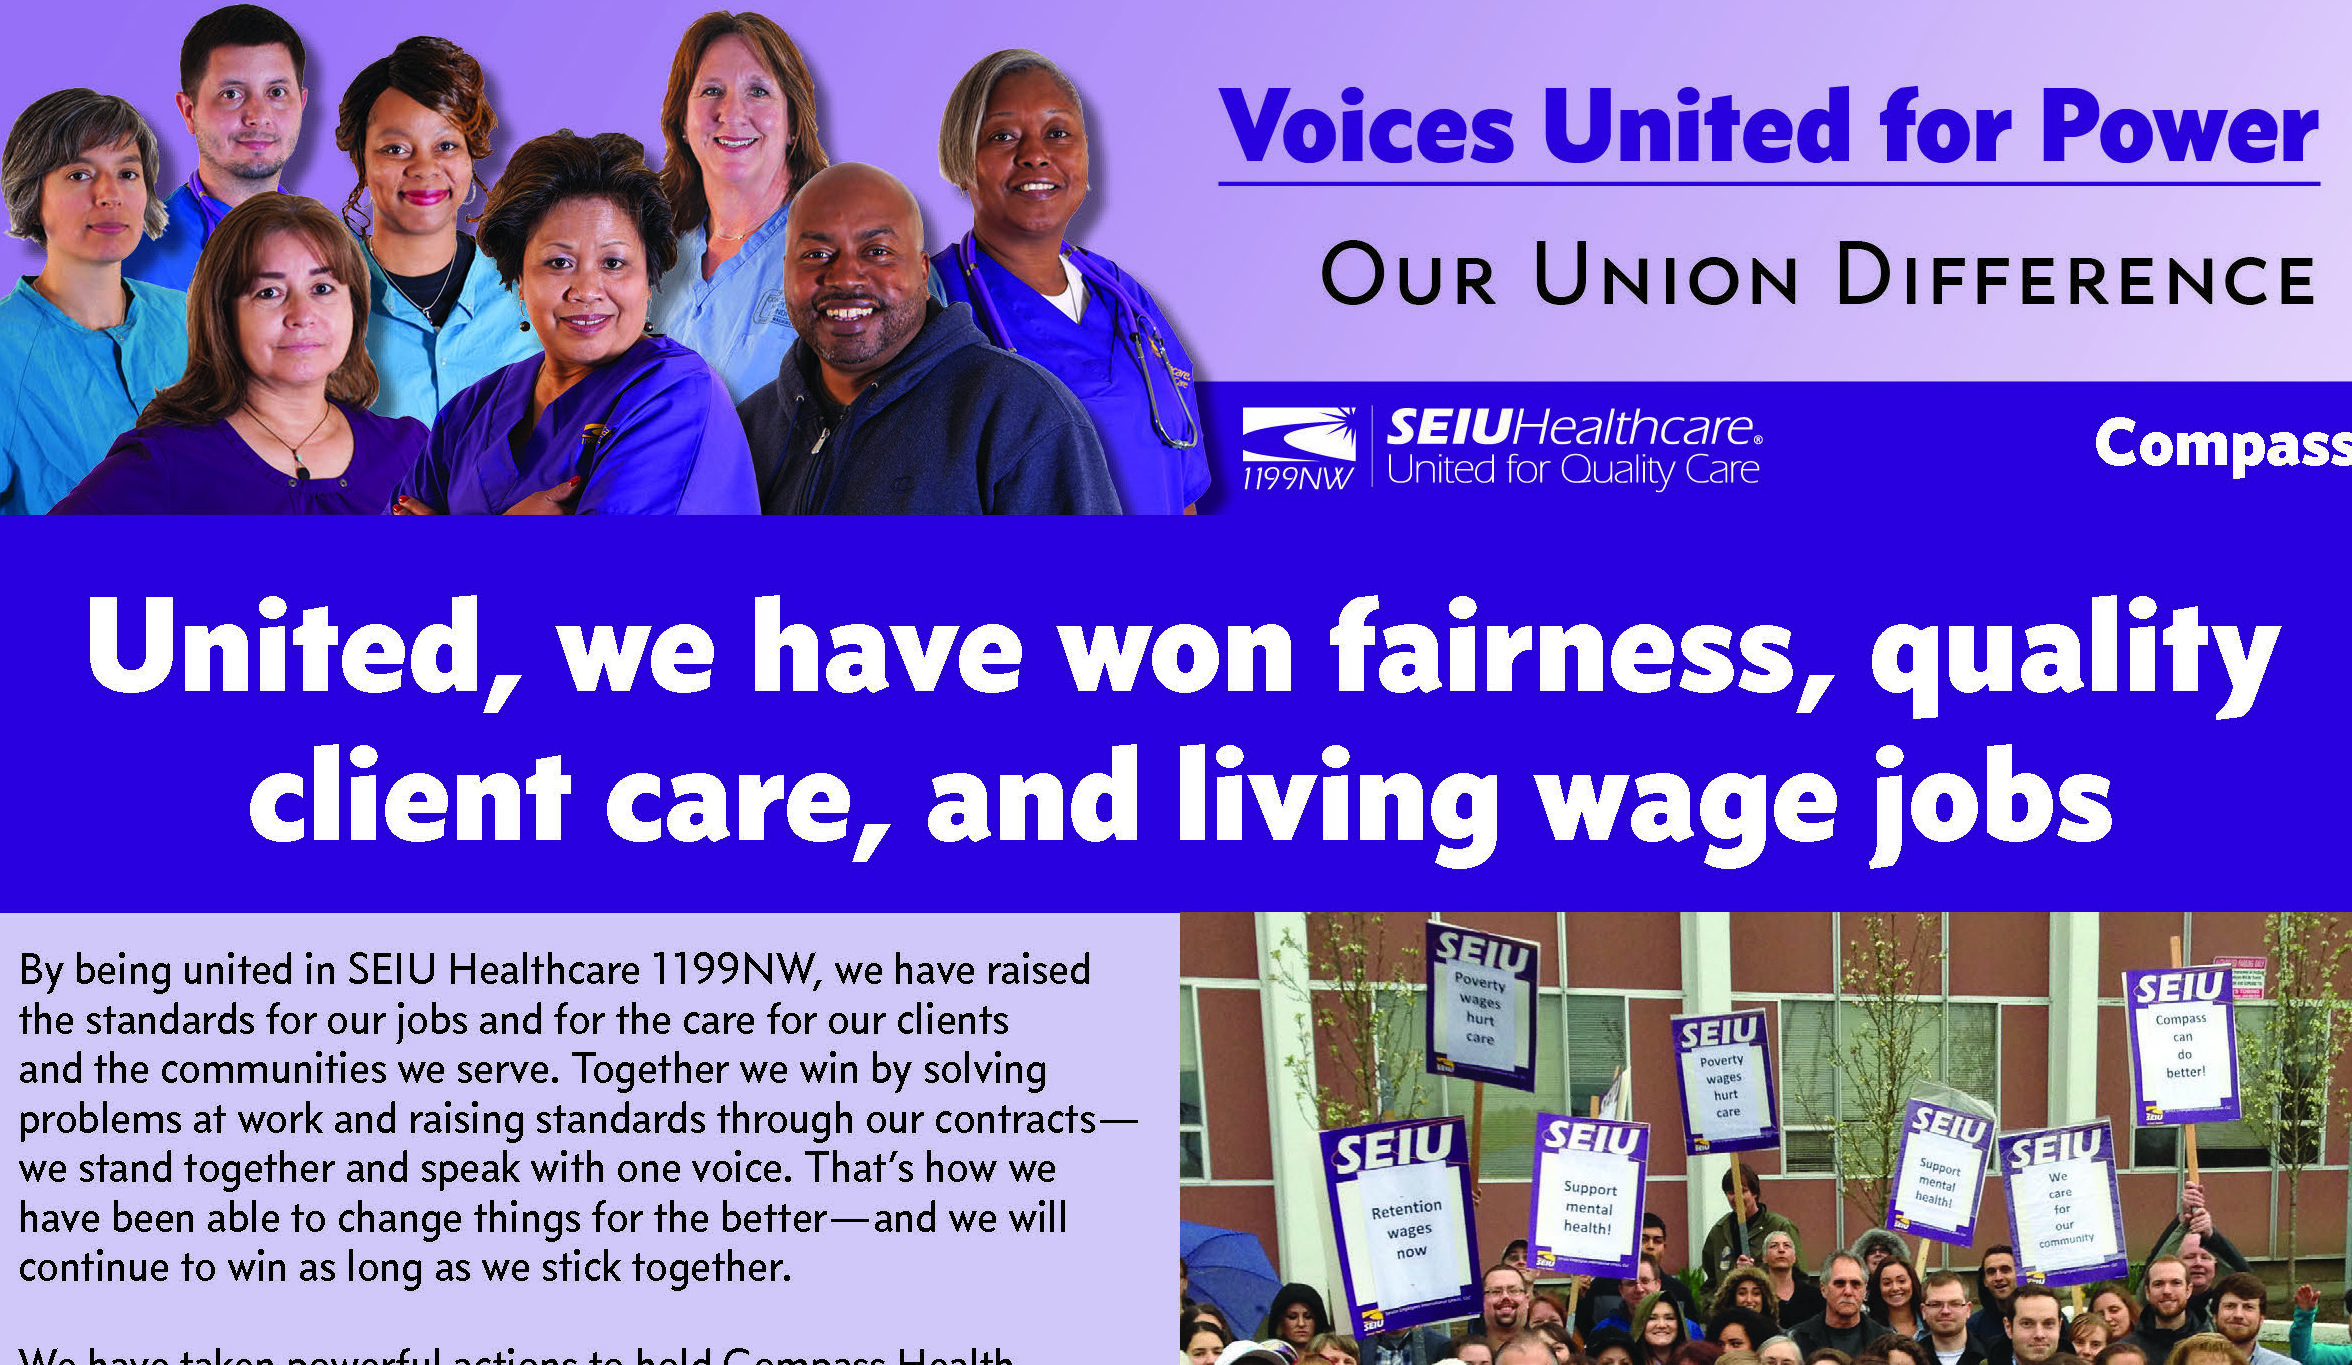 United we have won fairness, quality client care, and living wage jobs